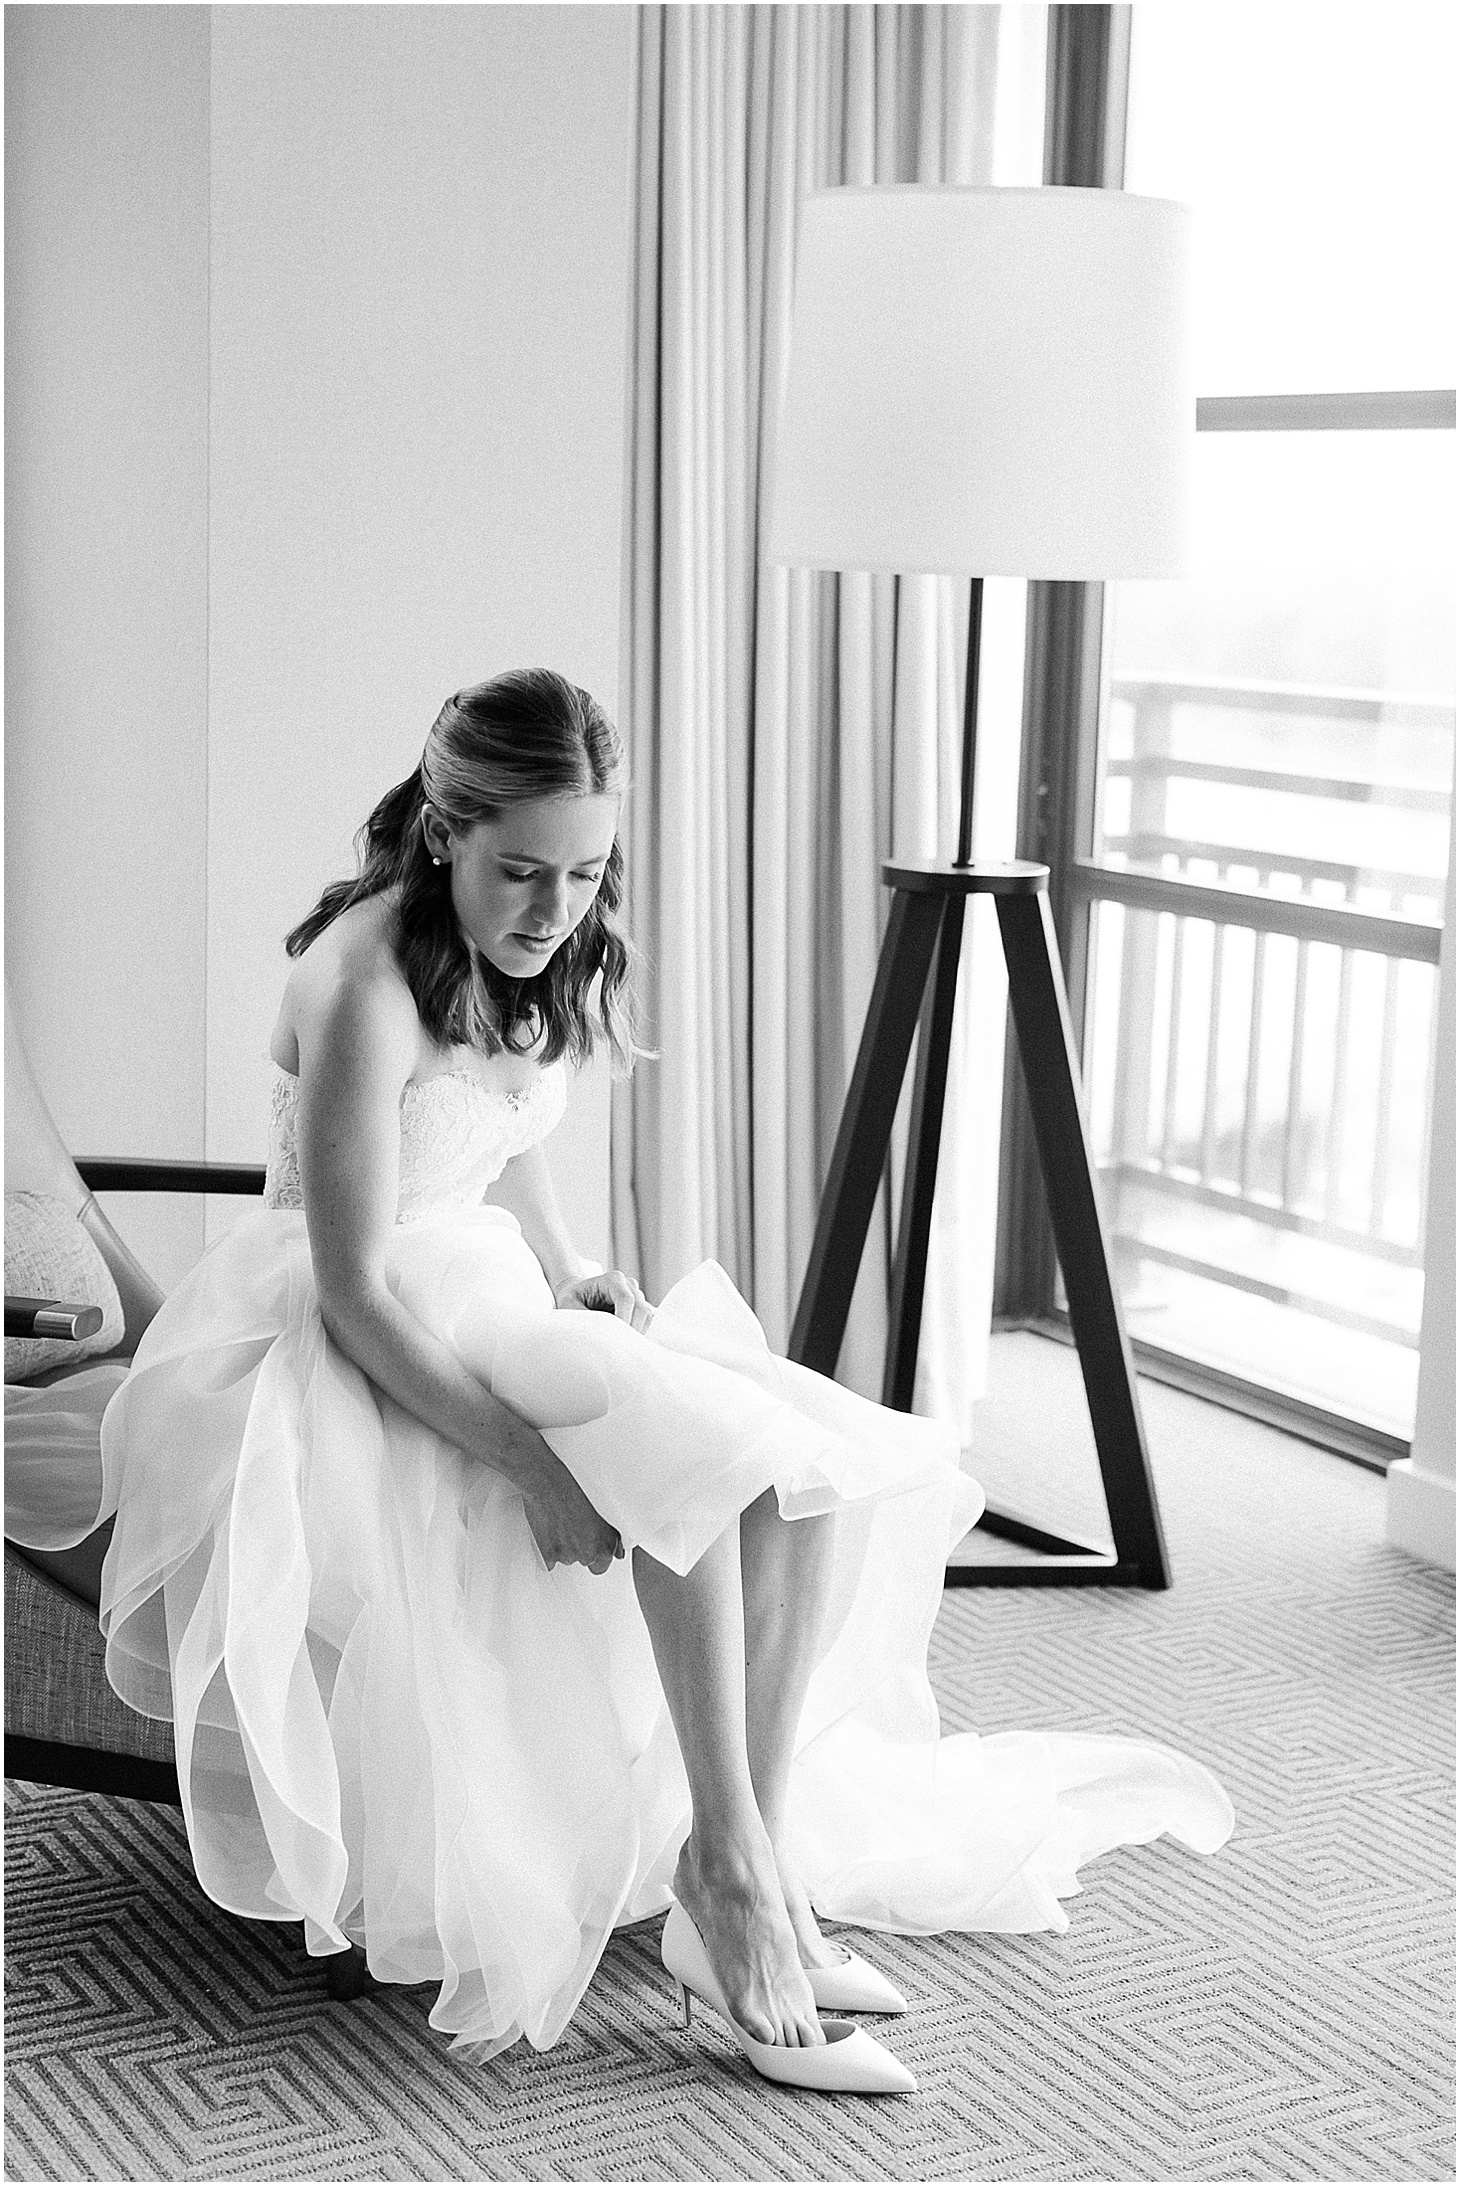 Reem Acra Wedding Dress and Christian Louboutin Heels, Bride Getting Ready at Inter-Continental Hotel at Navy Yards in DC, Modern Textural Spring Wedding at District Winery, Sarah Bradshaw Photography, DC Wedding Photographer